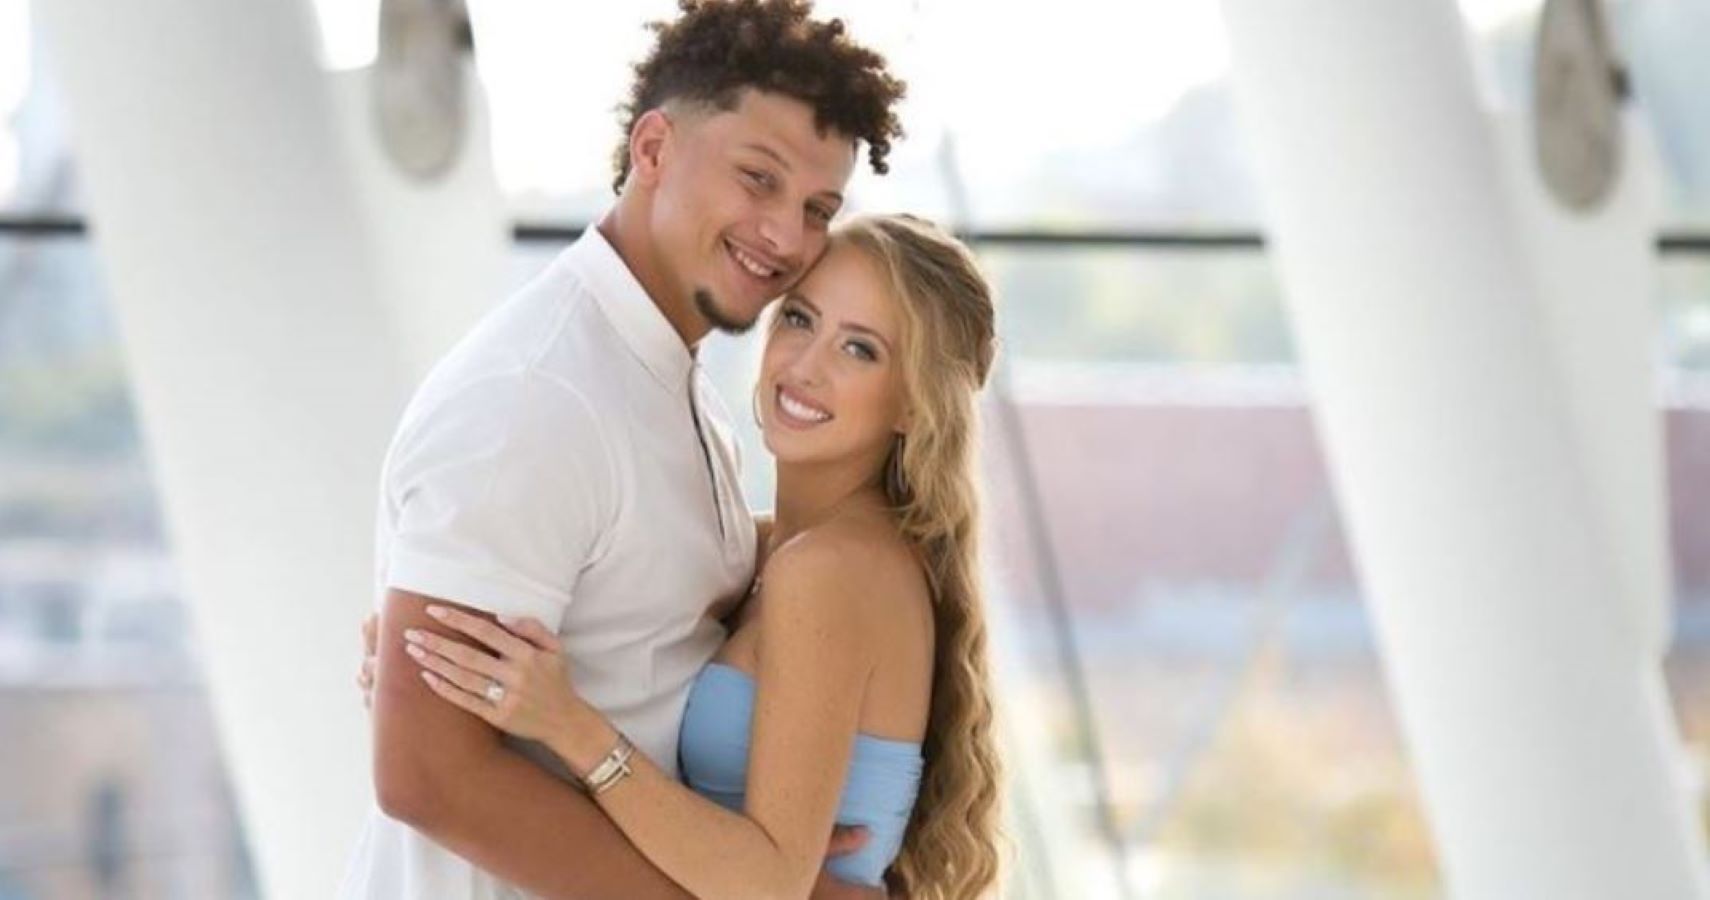 Patrick Mahomes reveals gender of first child